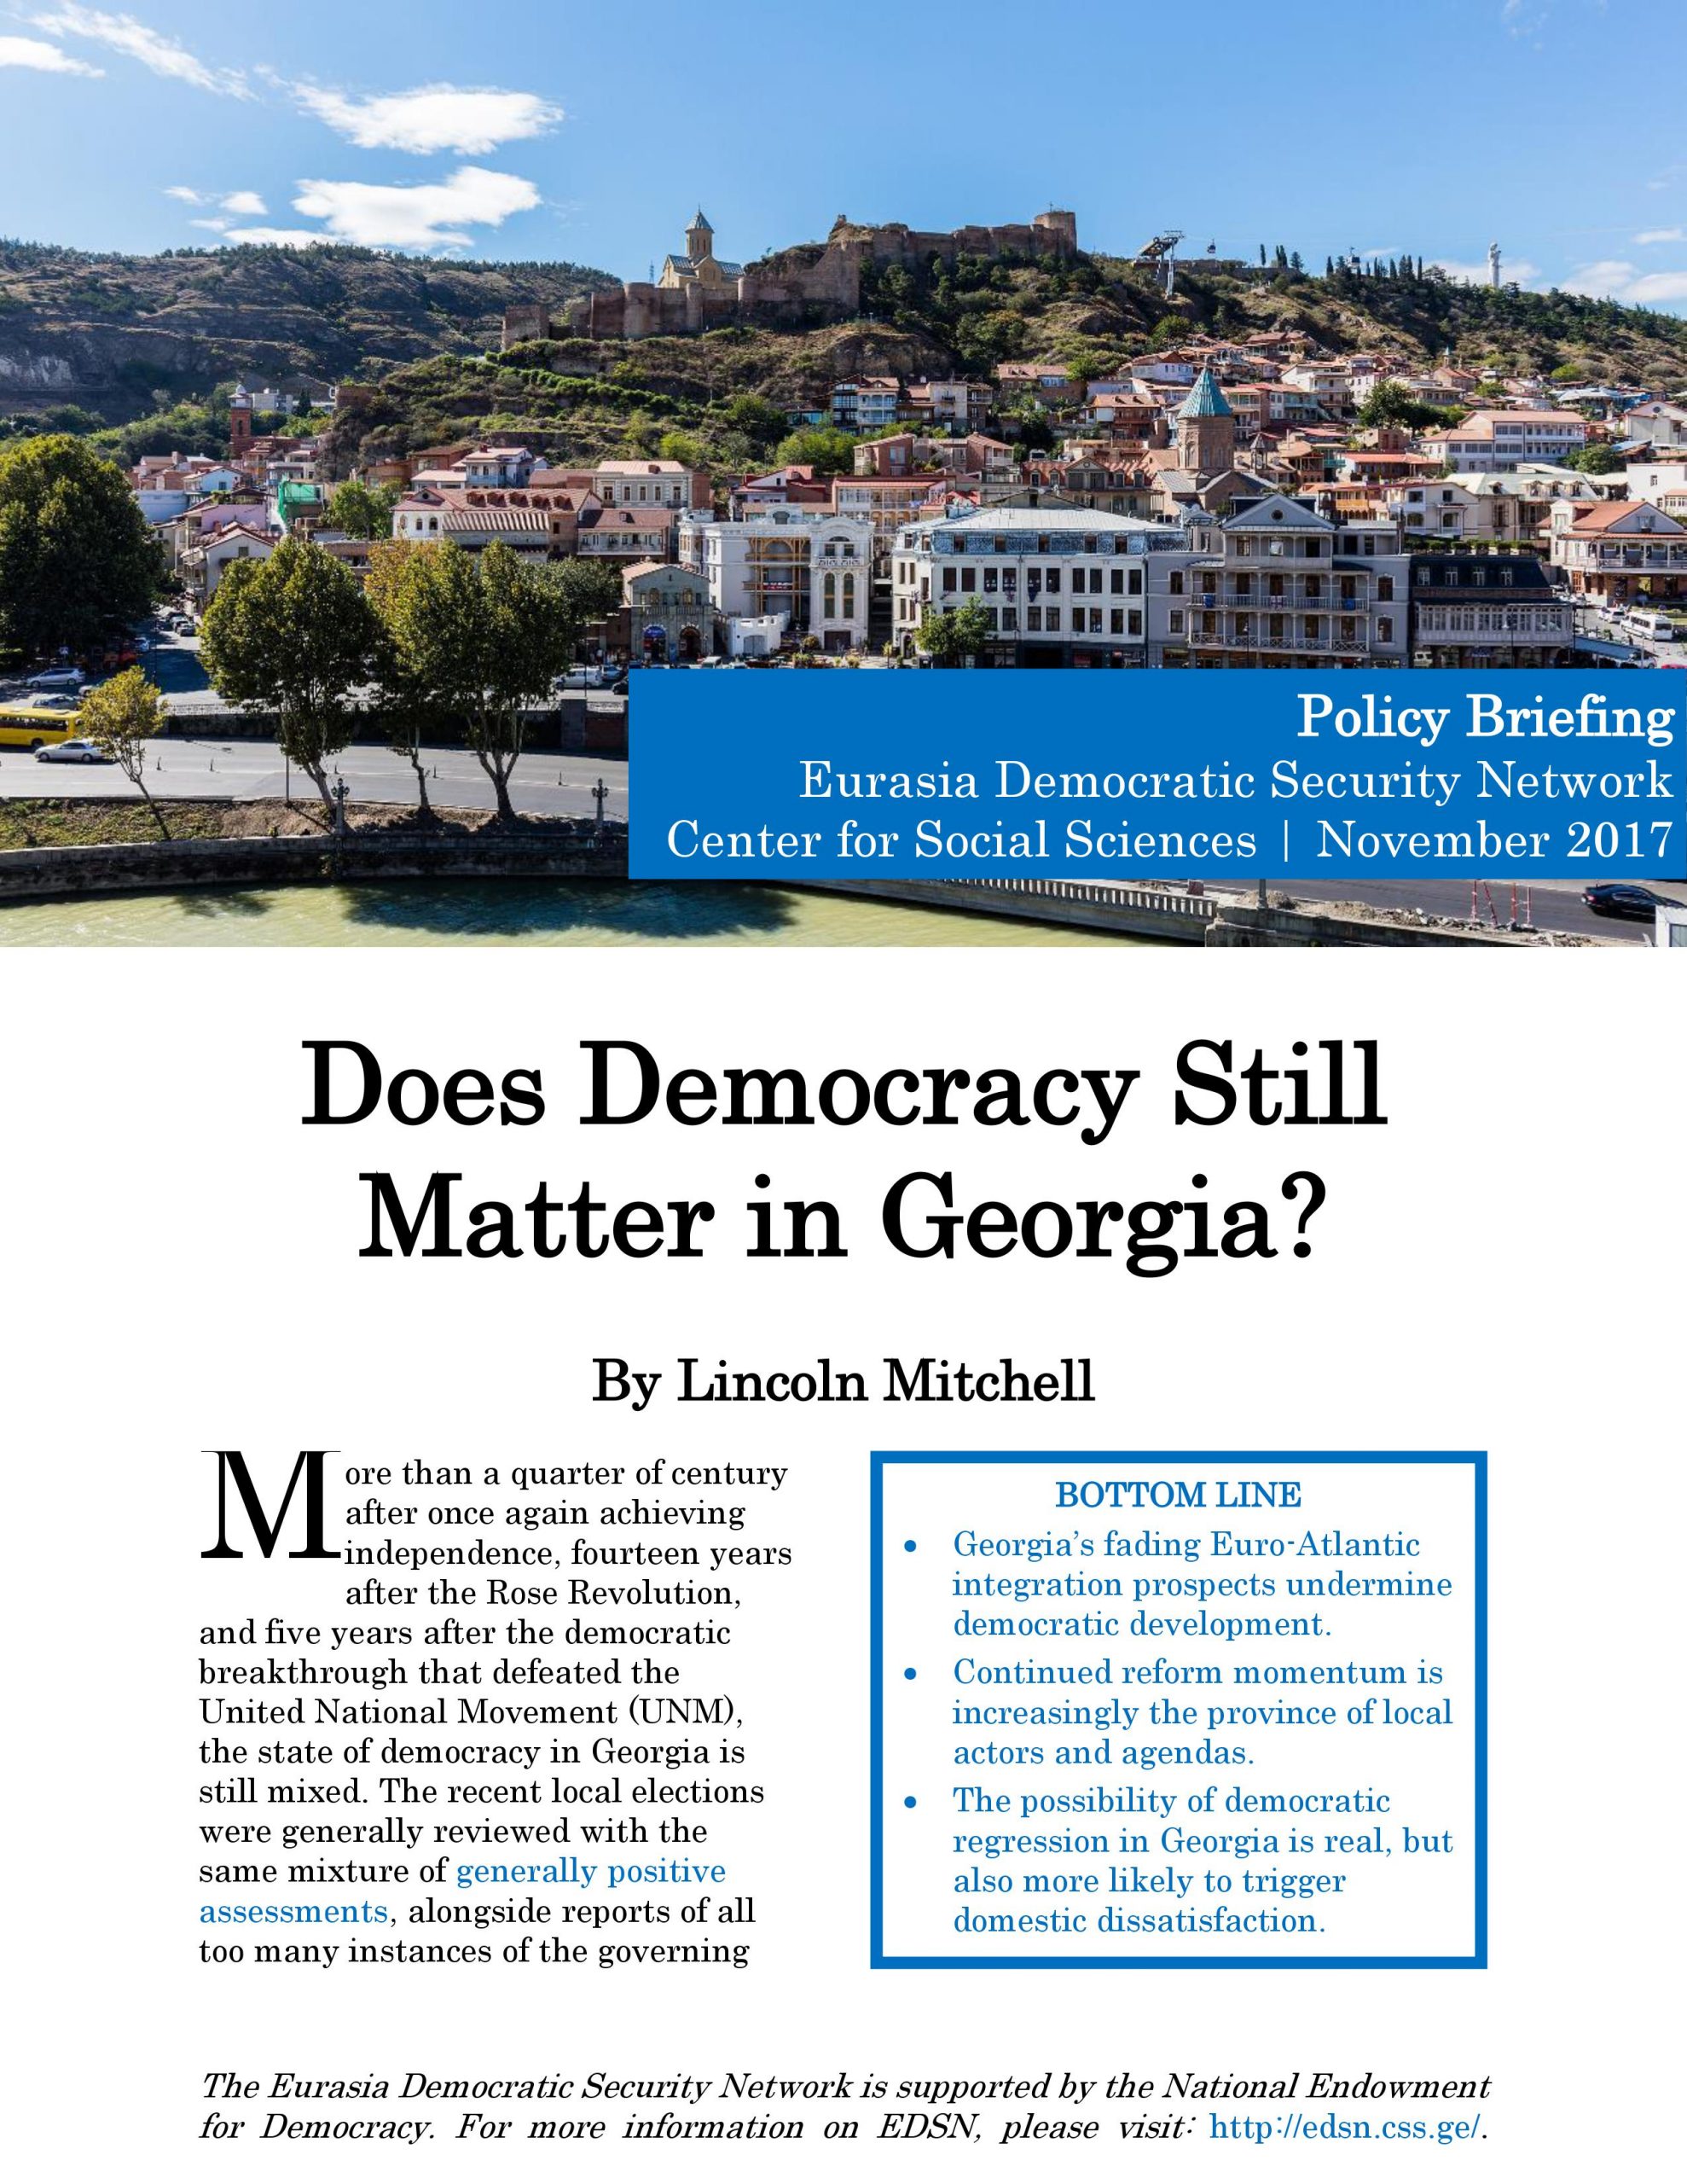 POLICY BRIEFING: Does Democracy Still Matter in Georgia?